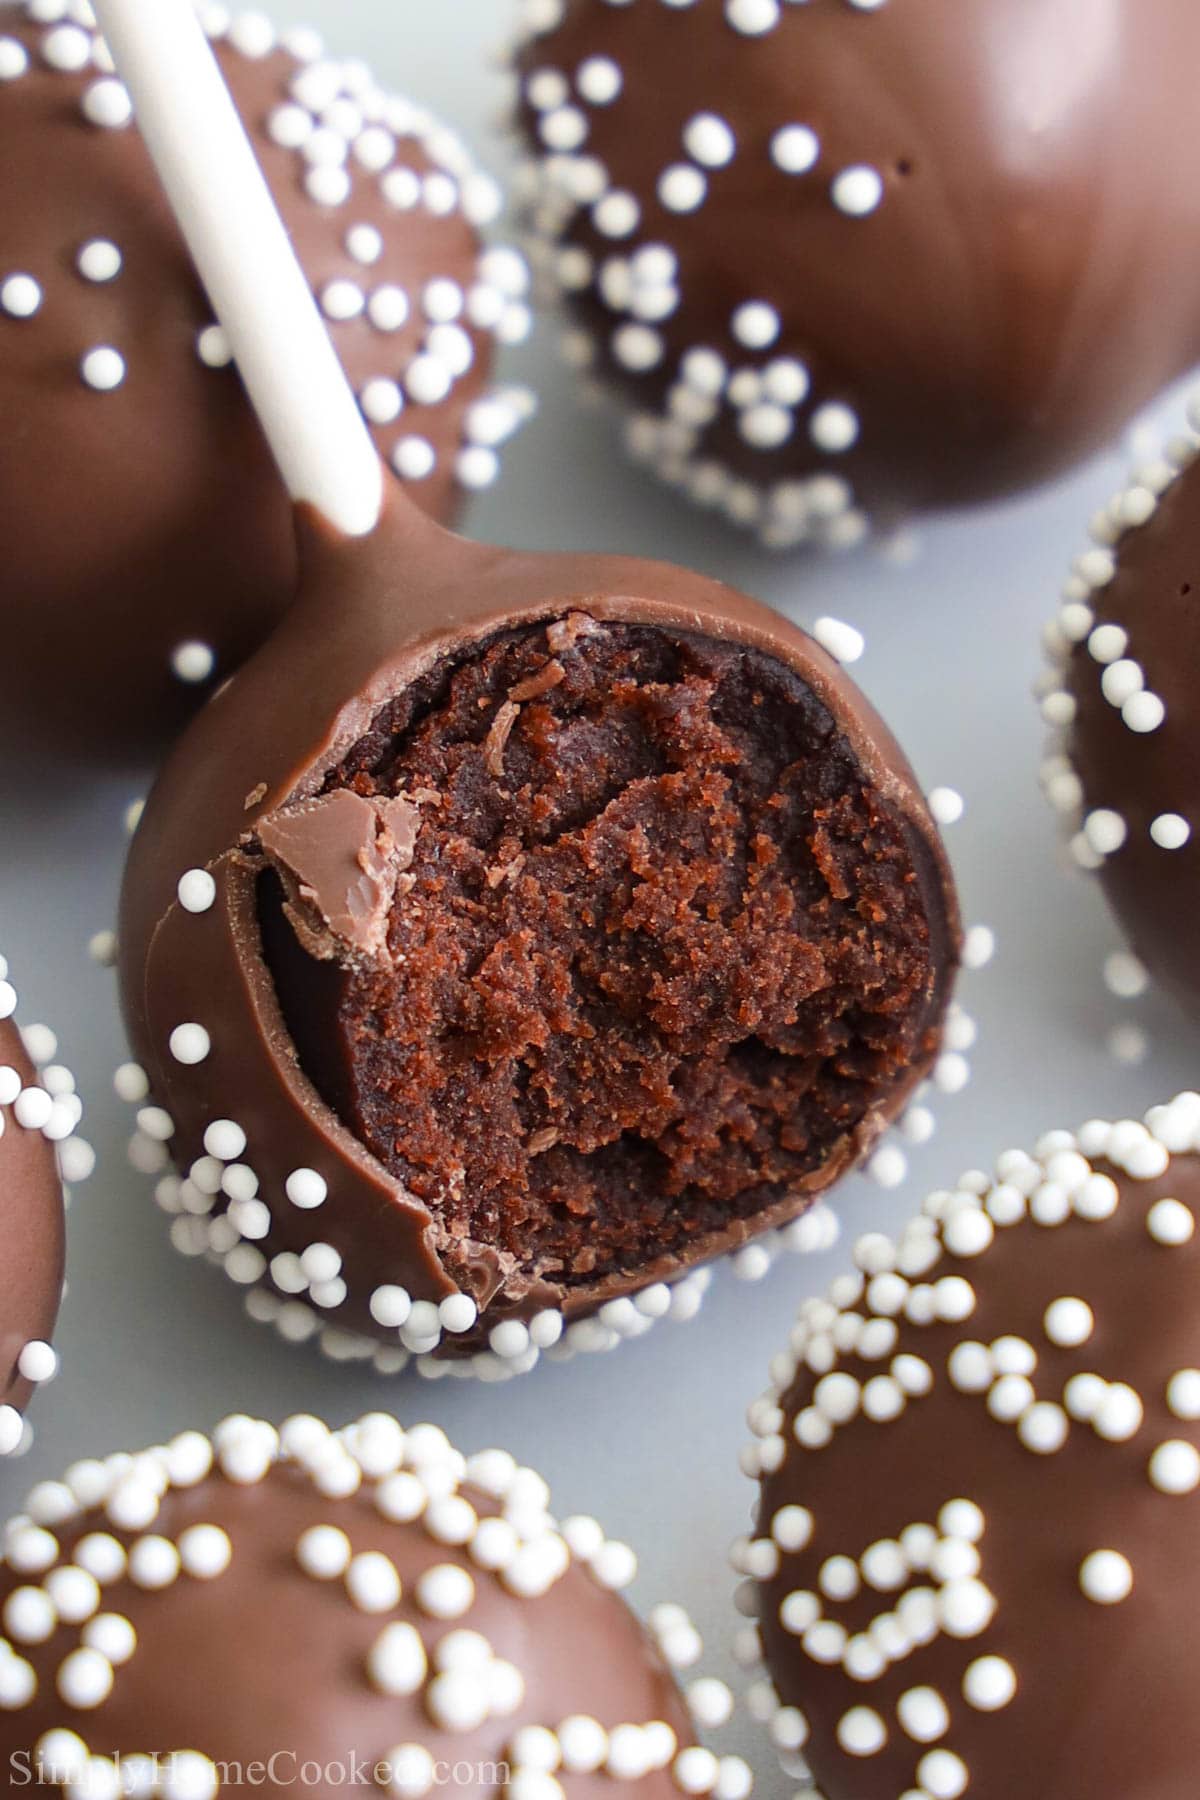 Closeup of a Chocolate Cake Pop with nonpareils, one with a bite missing.